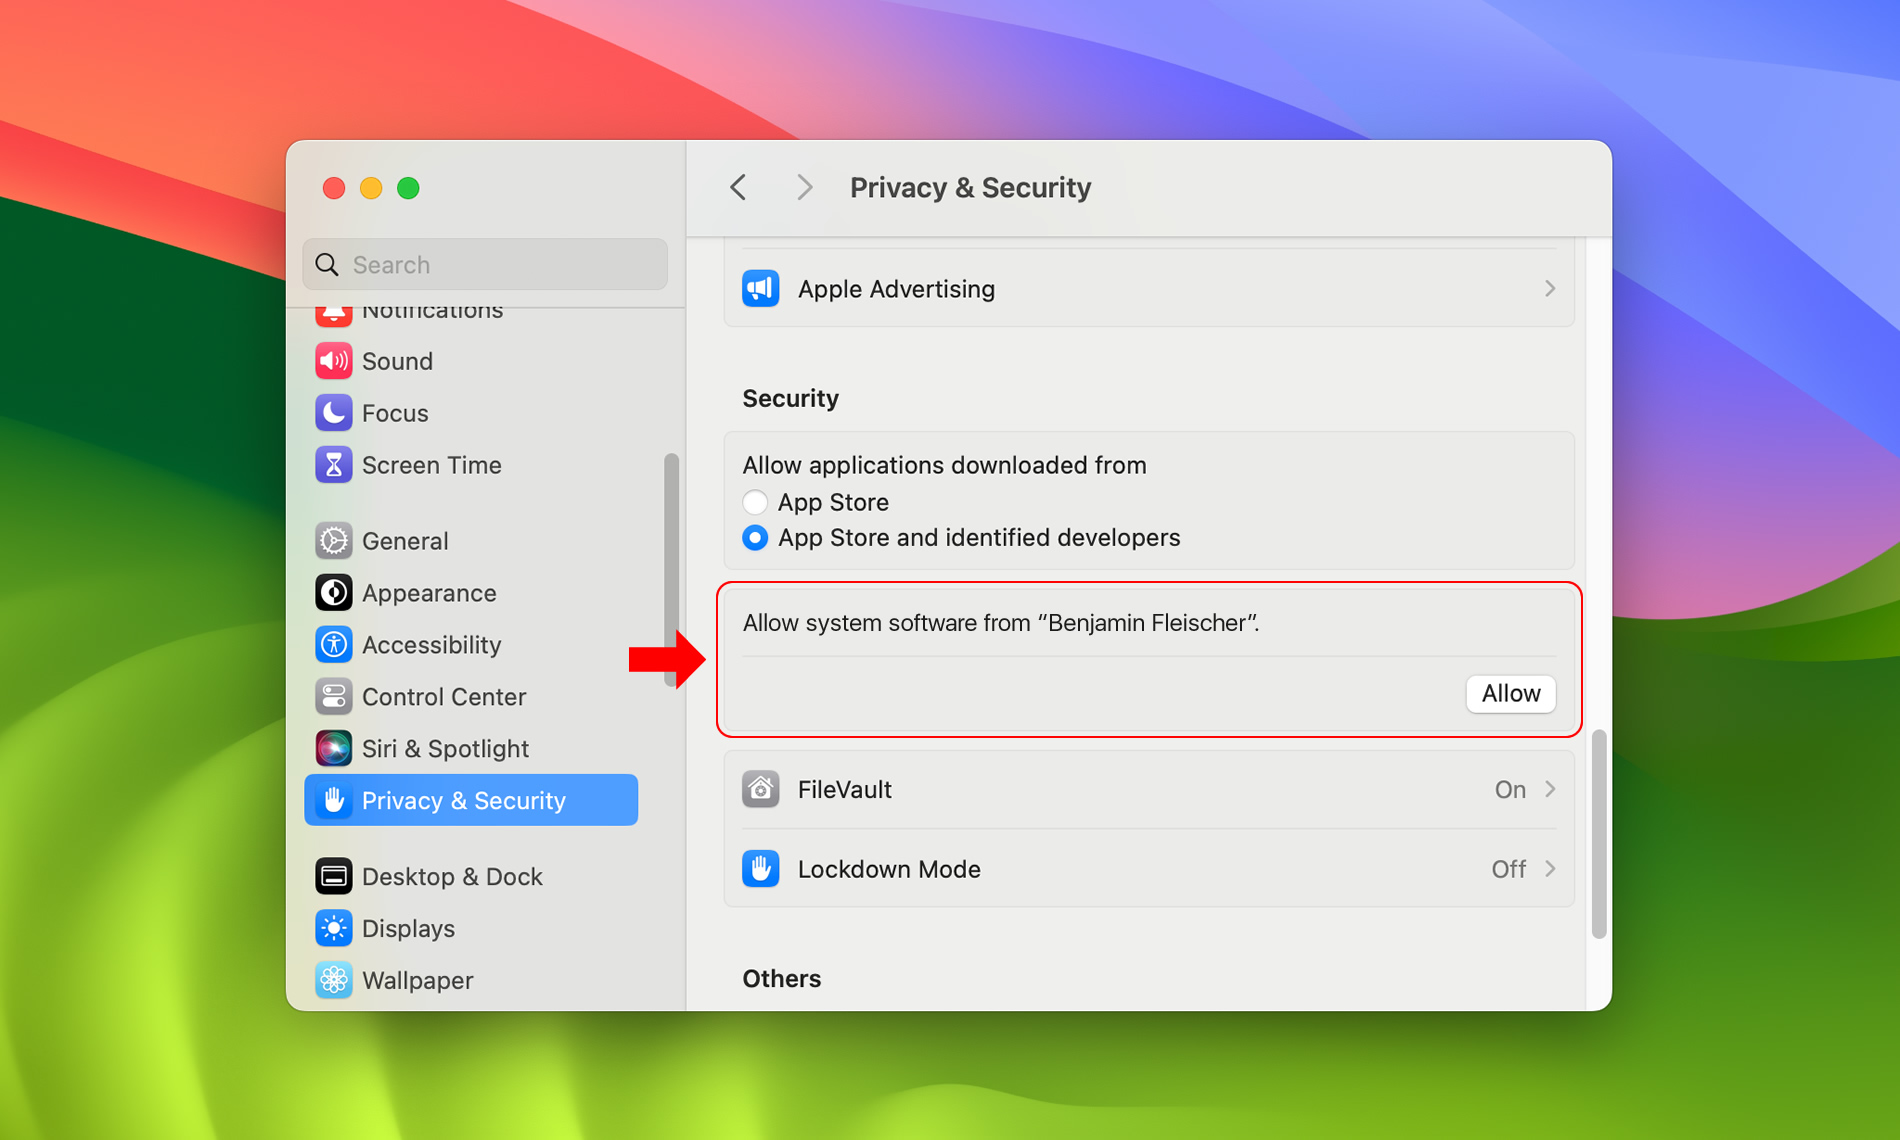 Open System Preferences > Security & Privacy > General (tab).